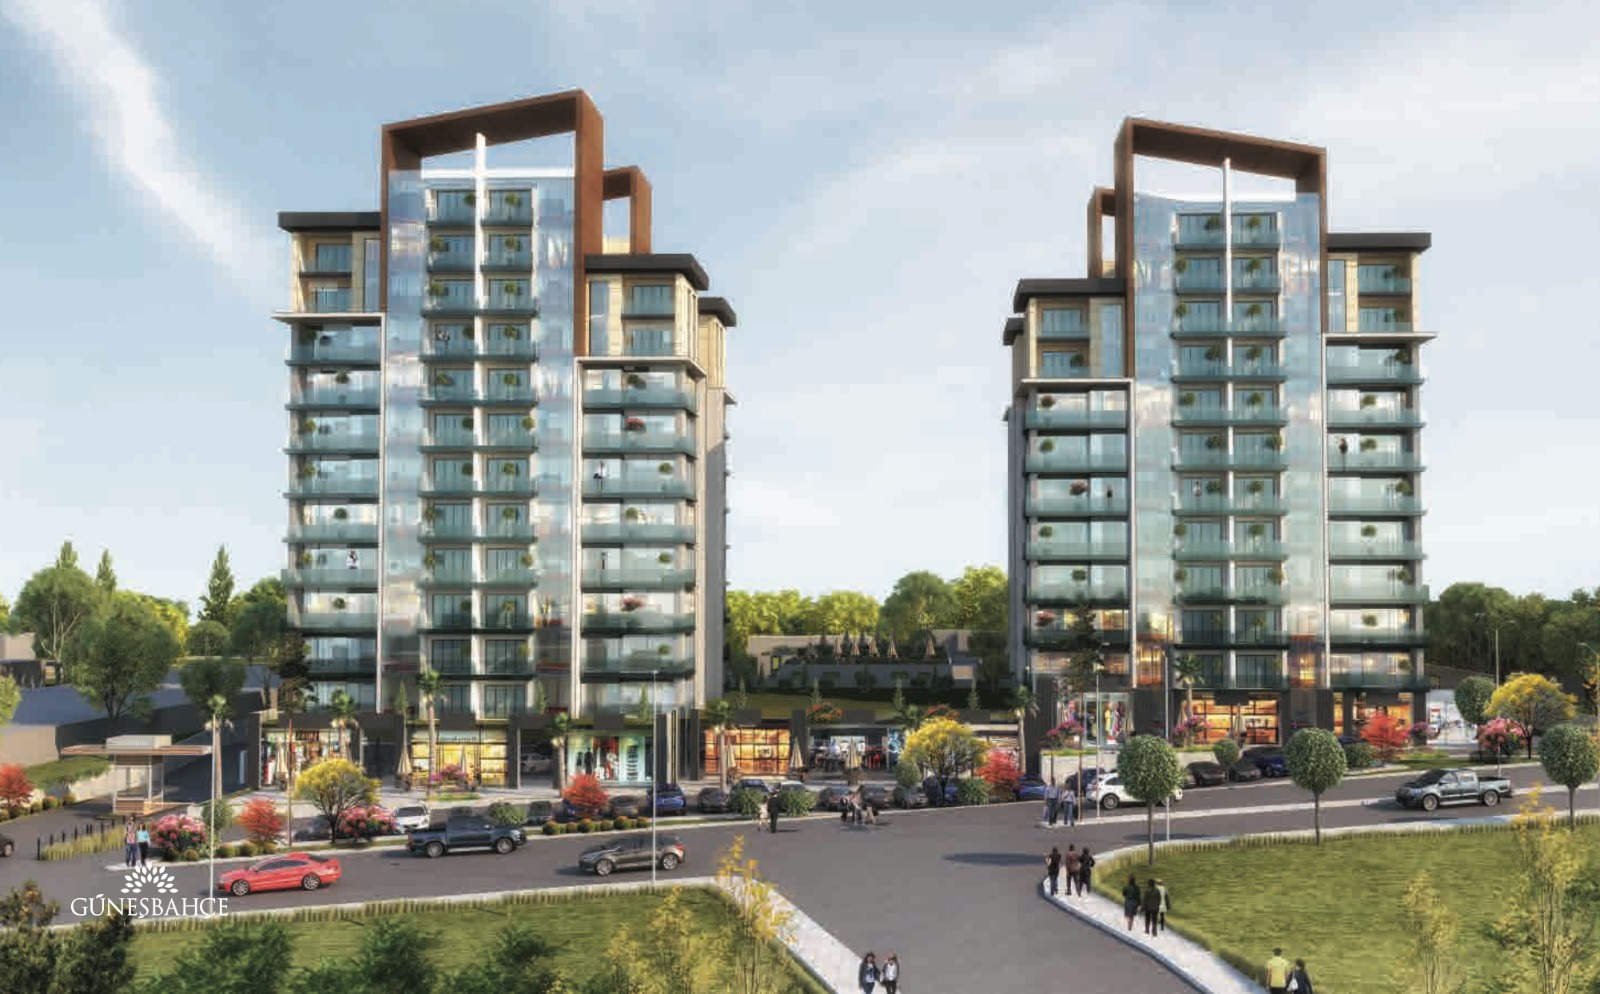 New Homes for Sale in Istanbul 2